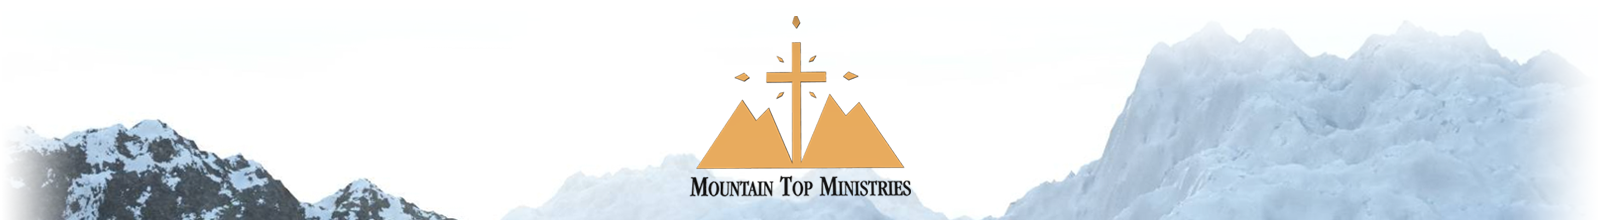 Mountain Top Ministries footer